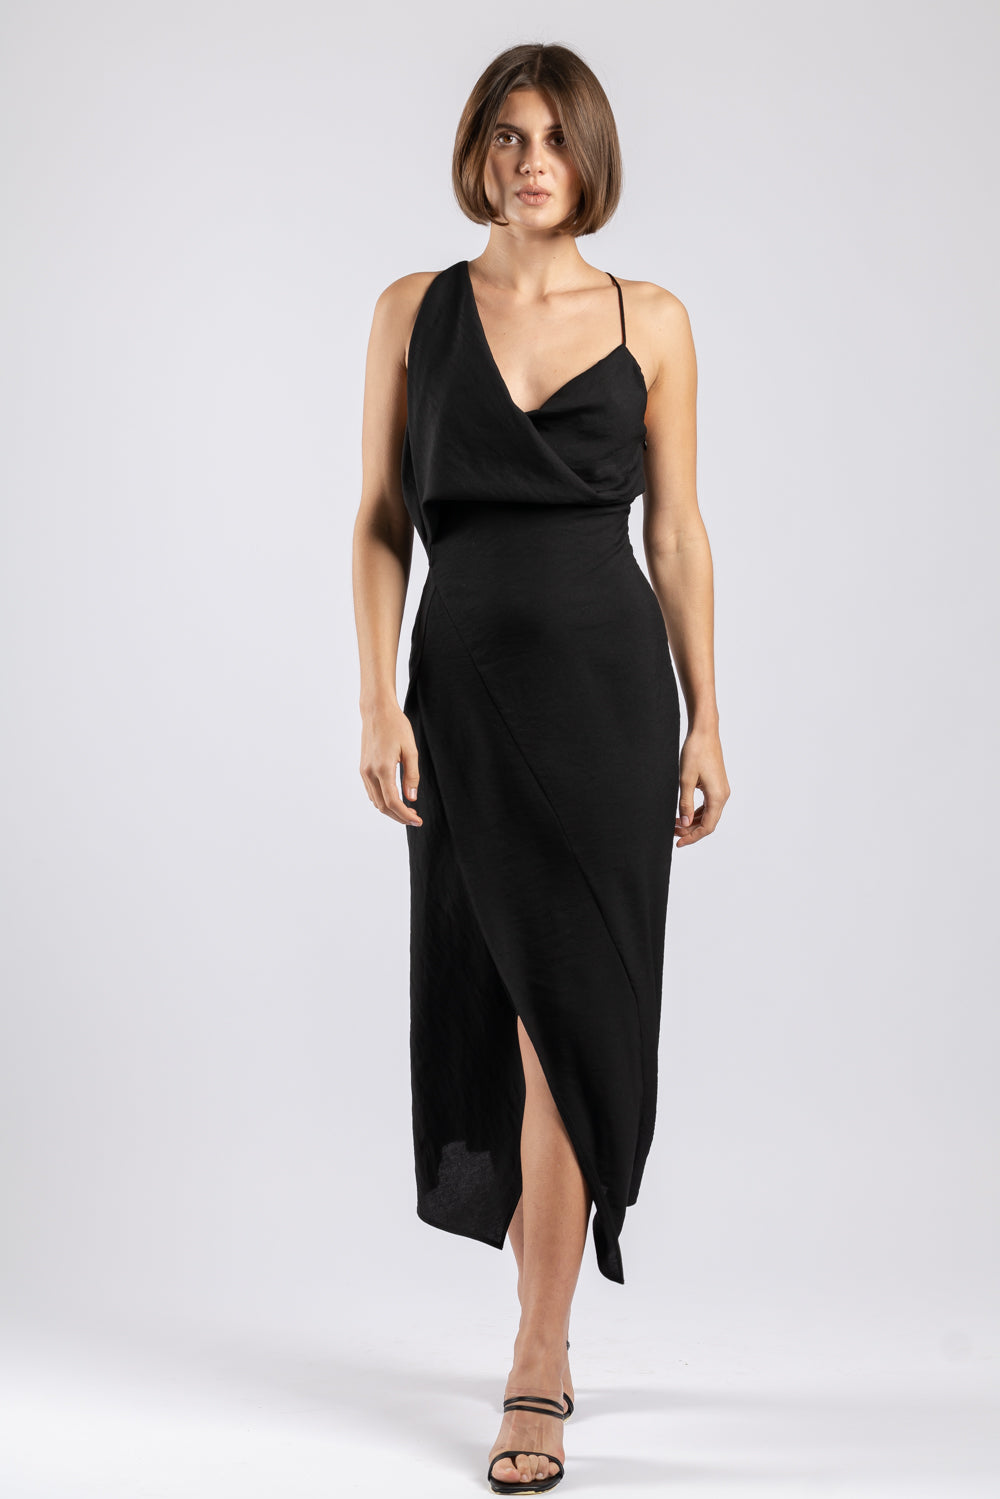 MUSE DRESS IN BLACK TEXTURE | One Fell Swoop